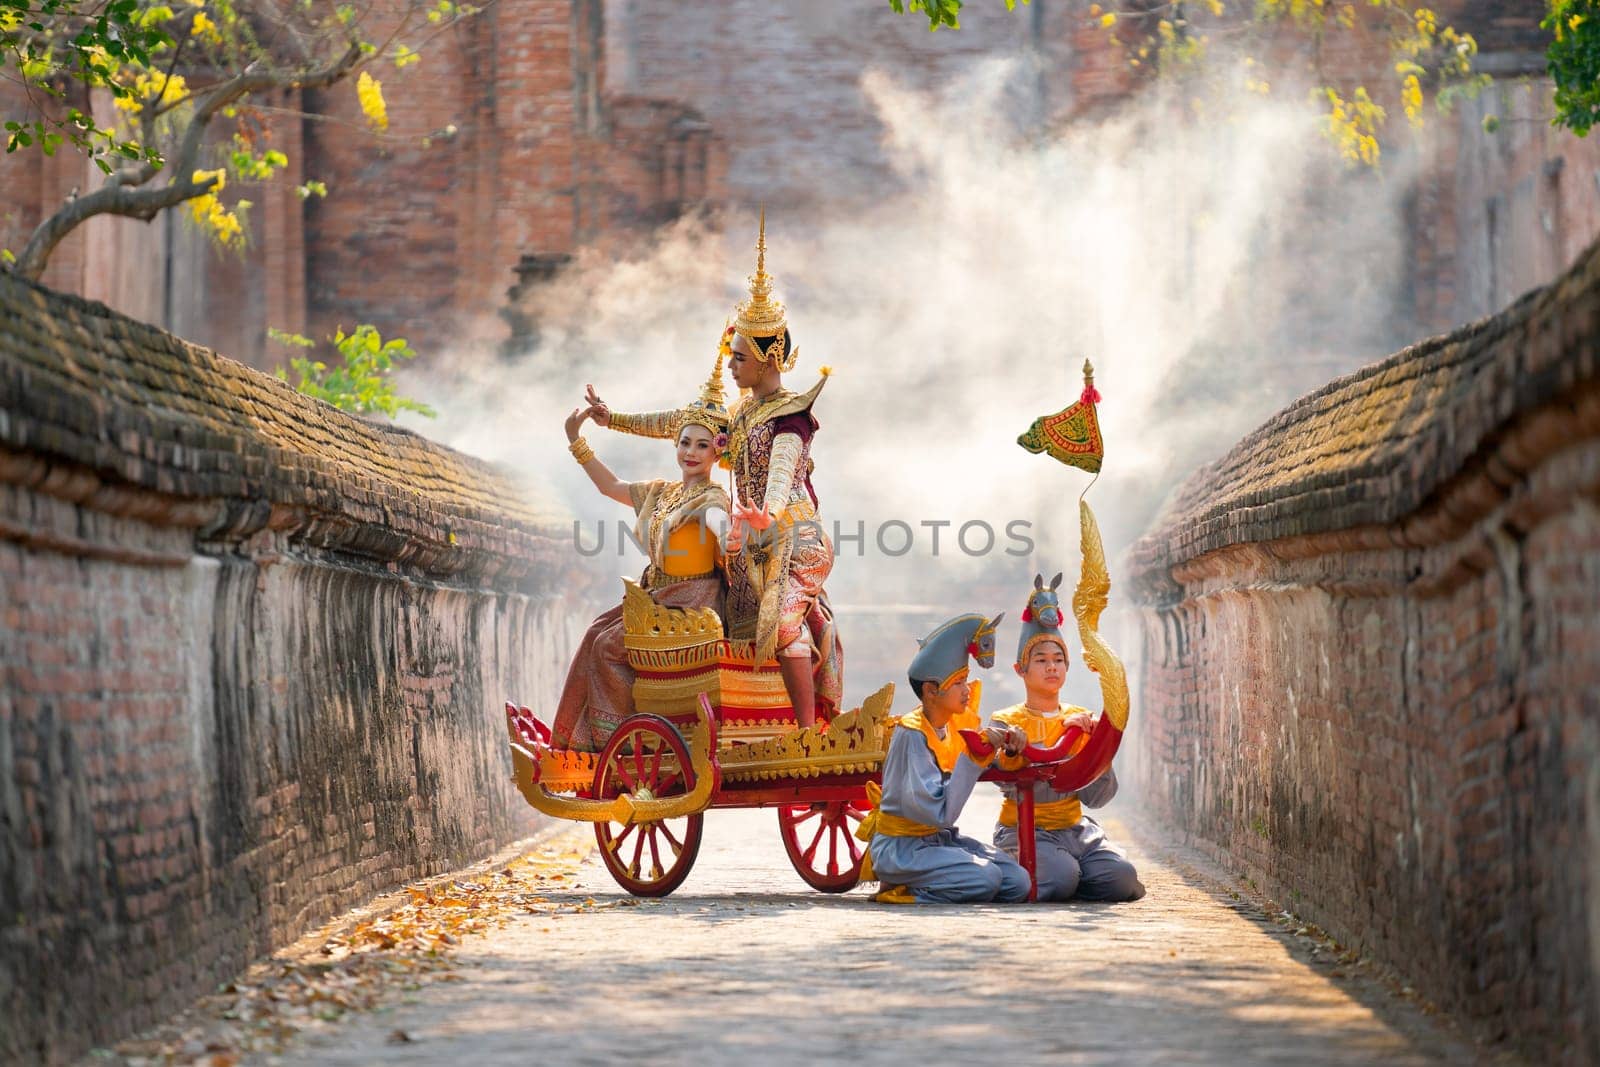 Asian man and woman with Thai old traditional dress stay together on traditional chariot in front of ancient building.